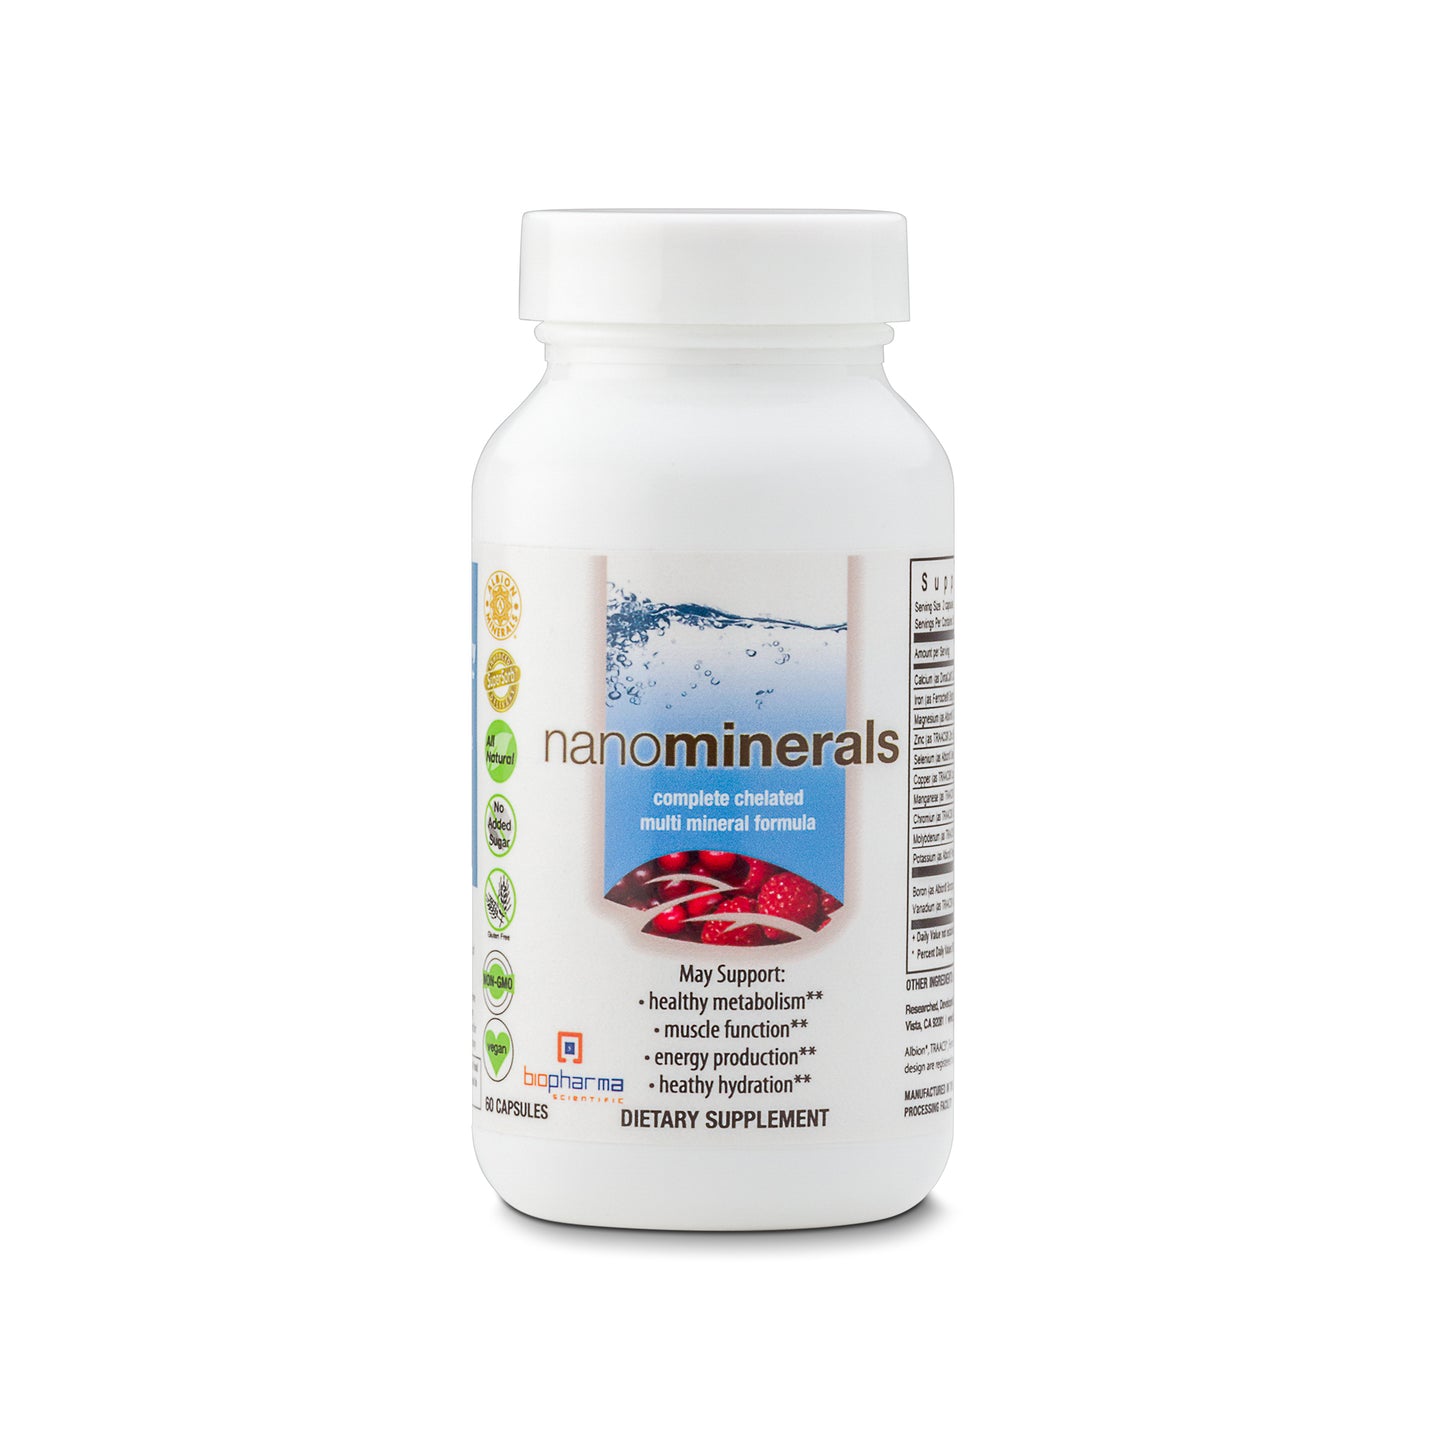 nanominerals complete chelated multi mineral supplement capsule - front side